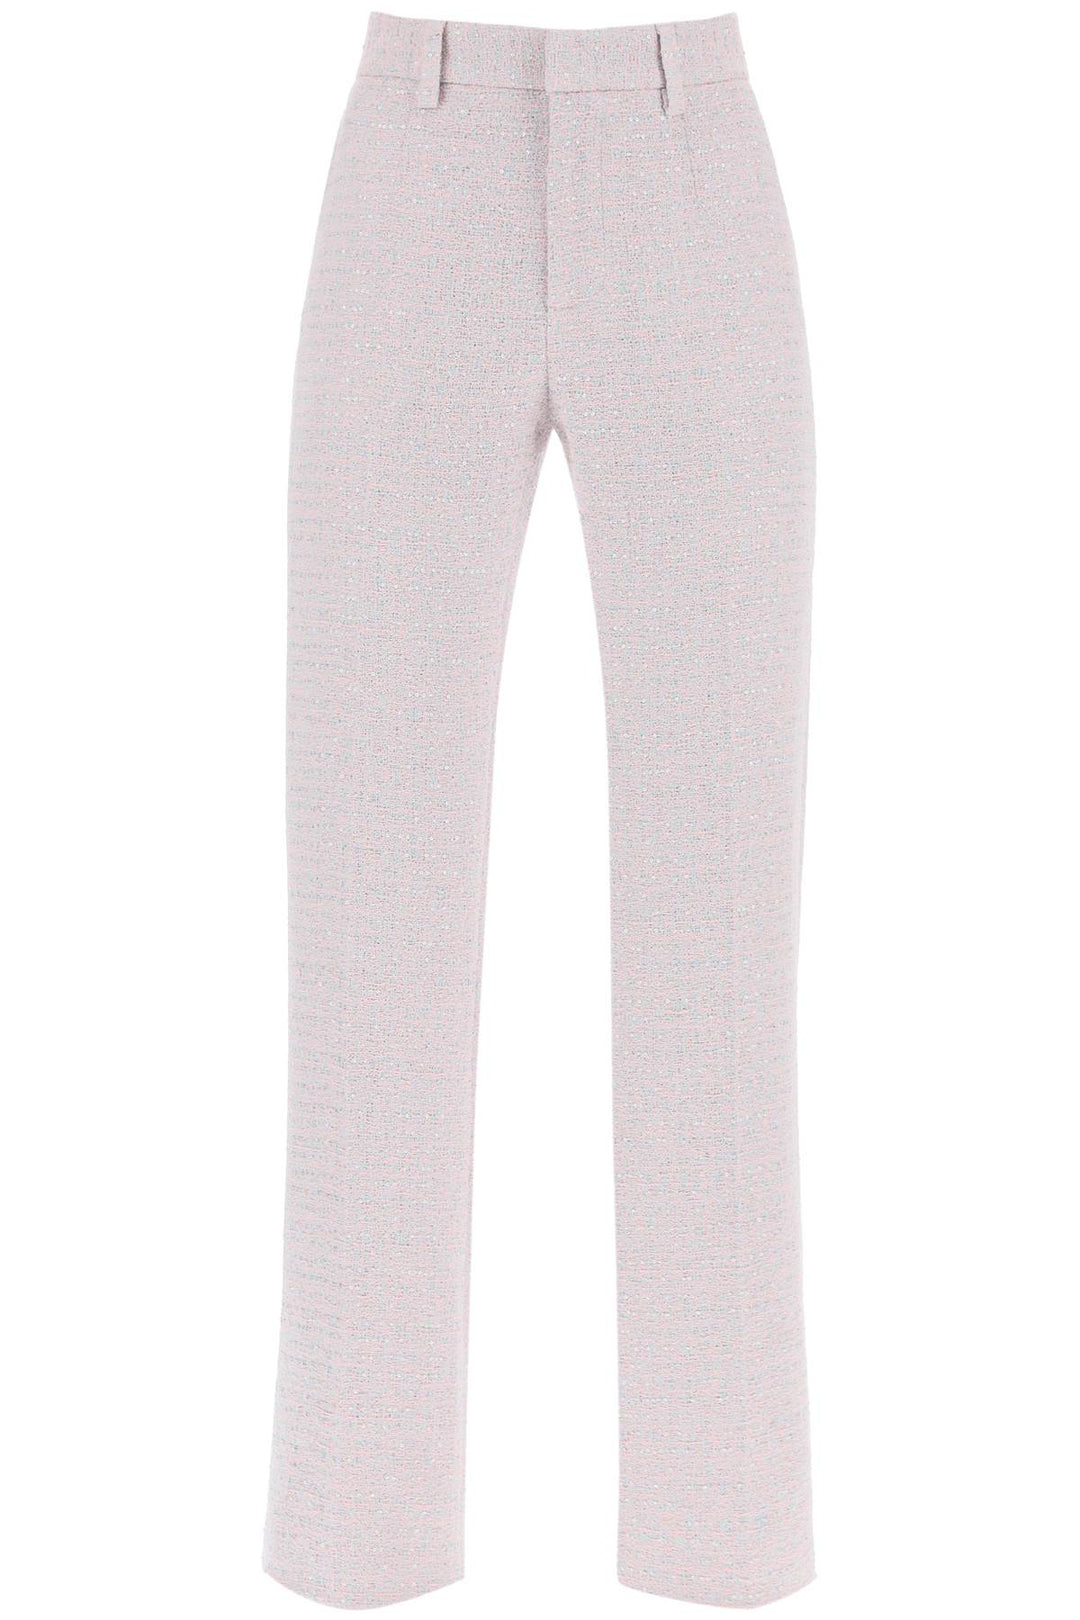 Pantaloni In Tweed Boucle' - Alessandra Rich - Donna